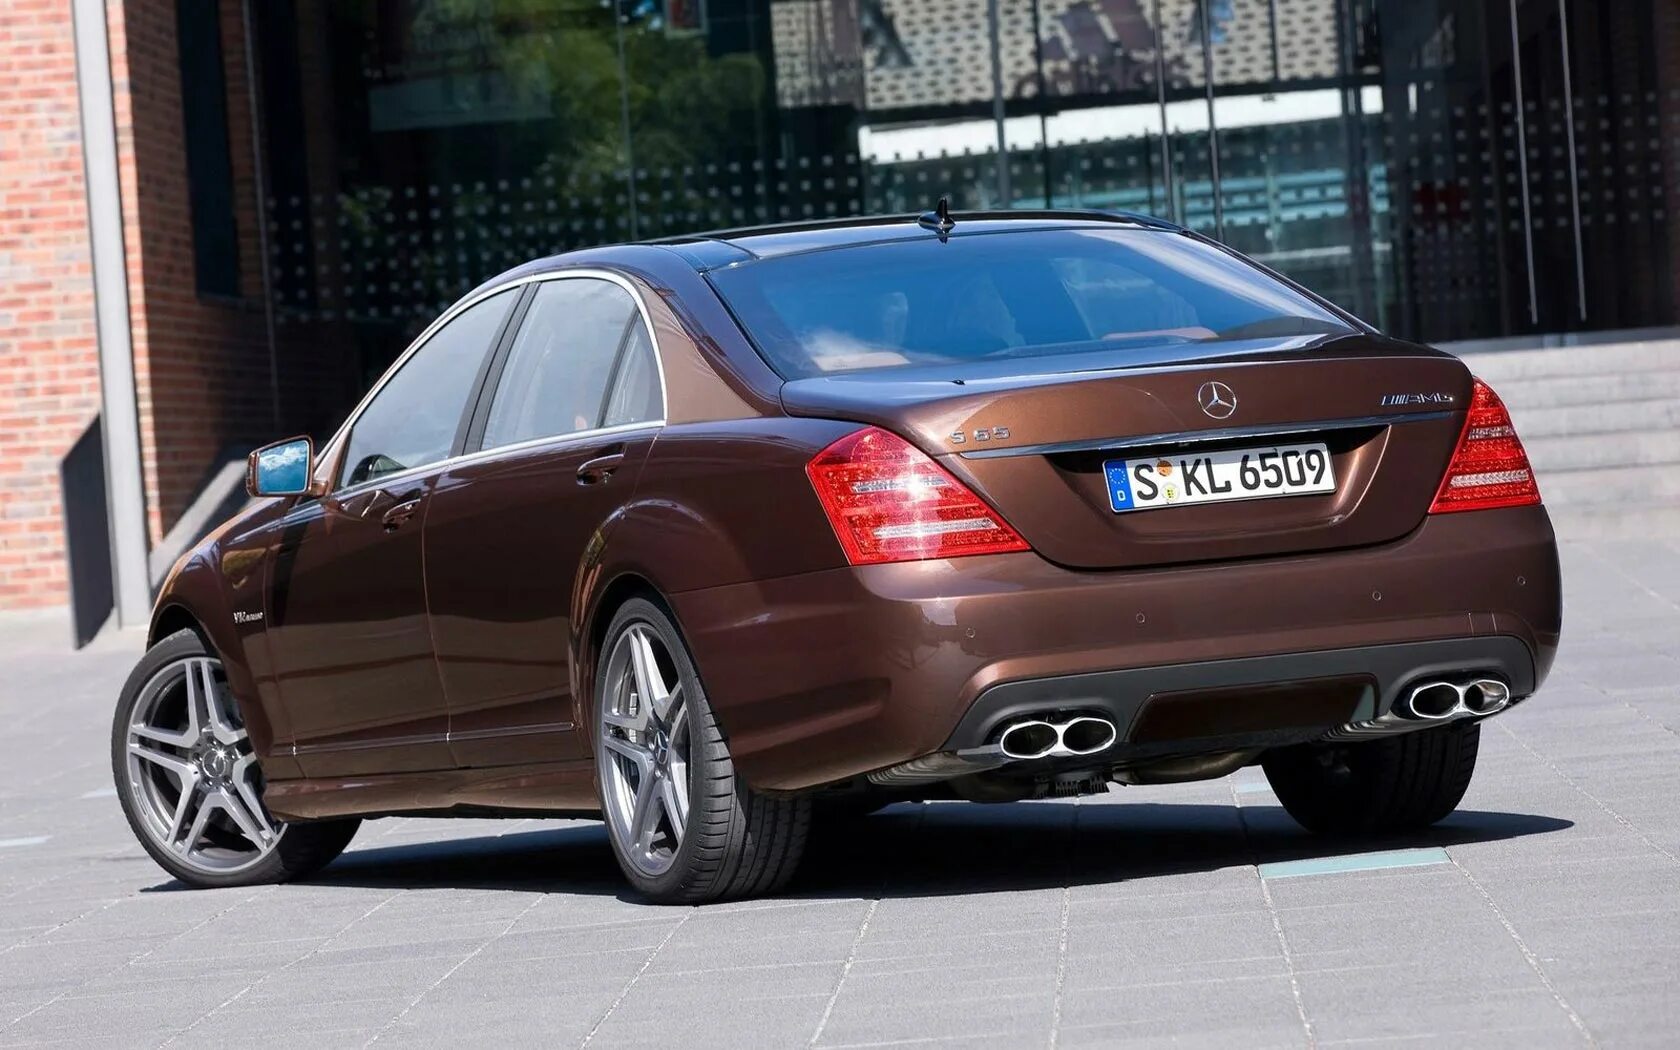 Mercedes Benz 221. Мерседес s65 AMG w221. Mercedes Benz s65 w221. Мерседес АМГ 65. Купить s 65